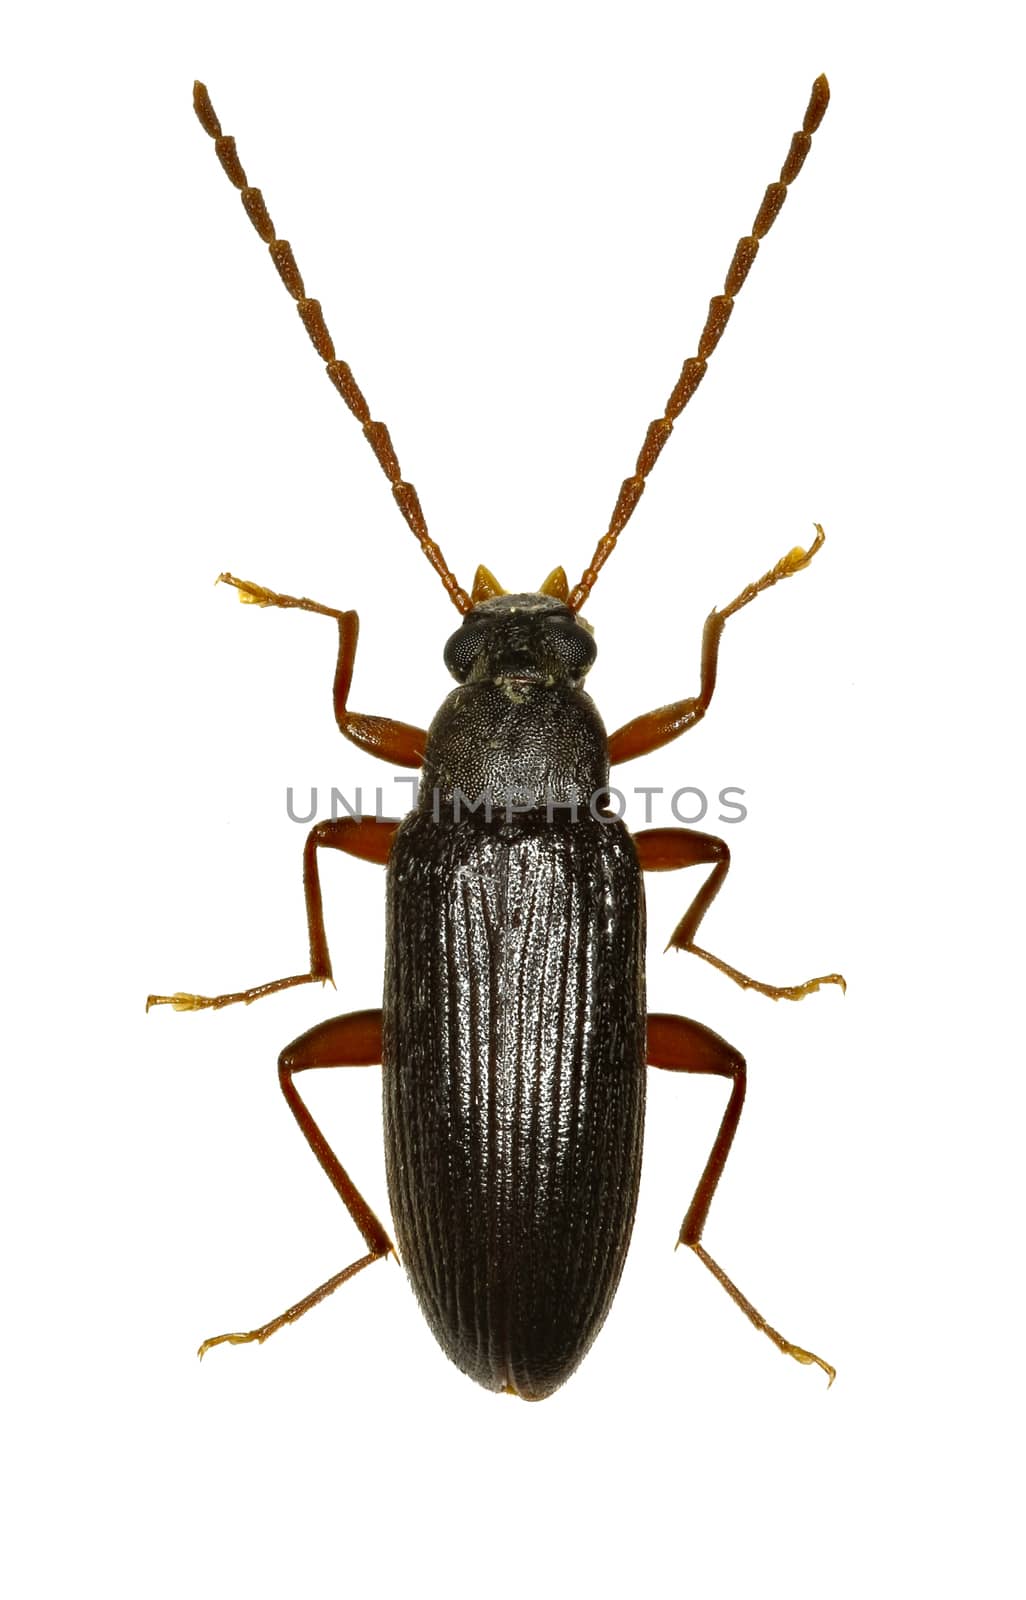 Comb-clawed Beetle Allecula on white Background  -  Allecula morio (Fabricius, 1787)